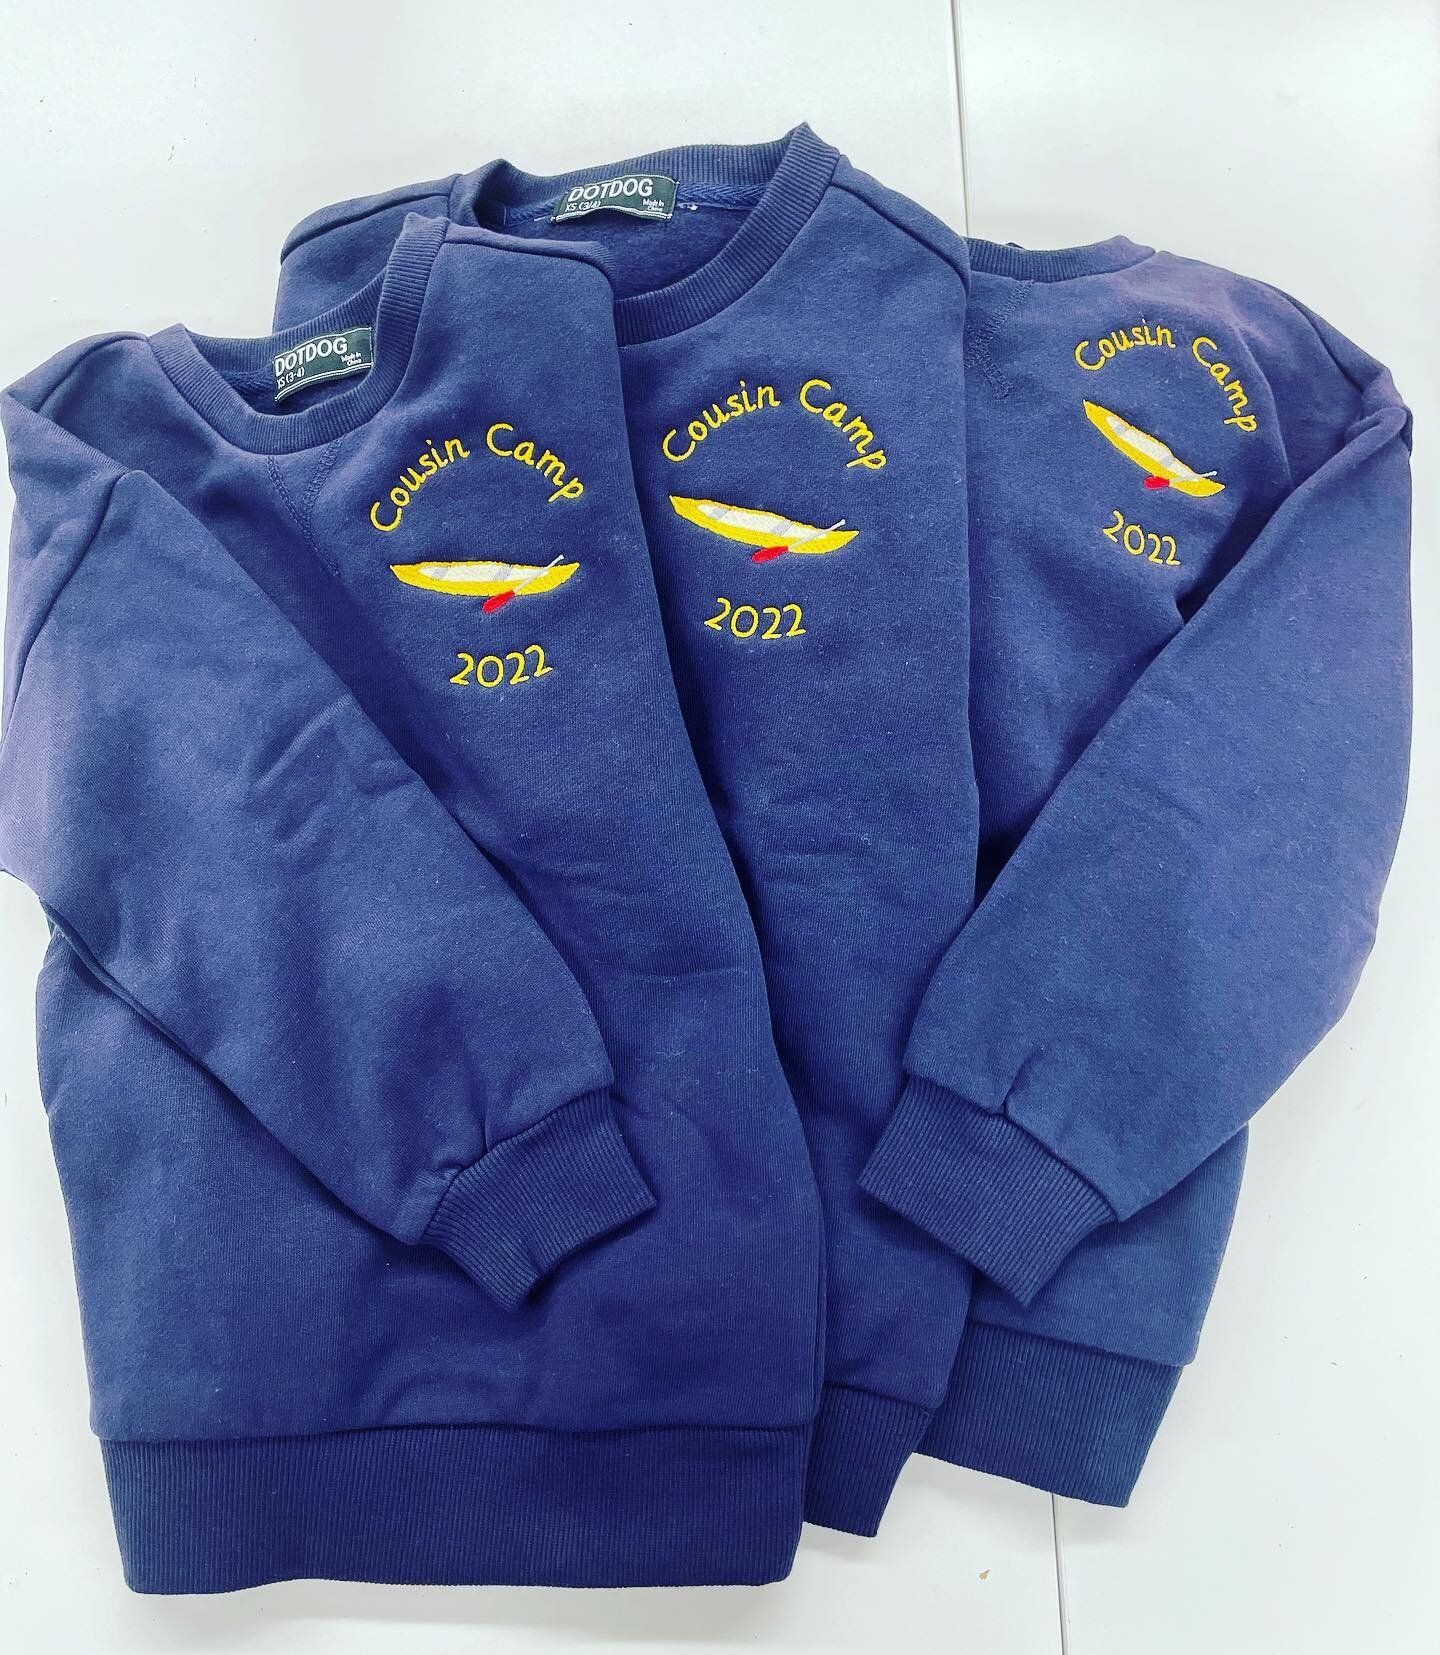 Camp ready&hellip; love these family sweatshirts for the kids! #camp #kids #justaddembroidery